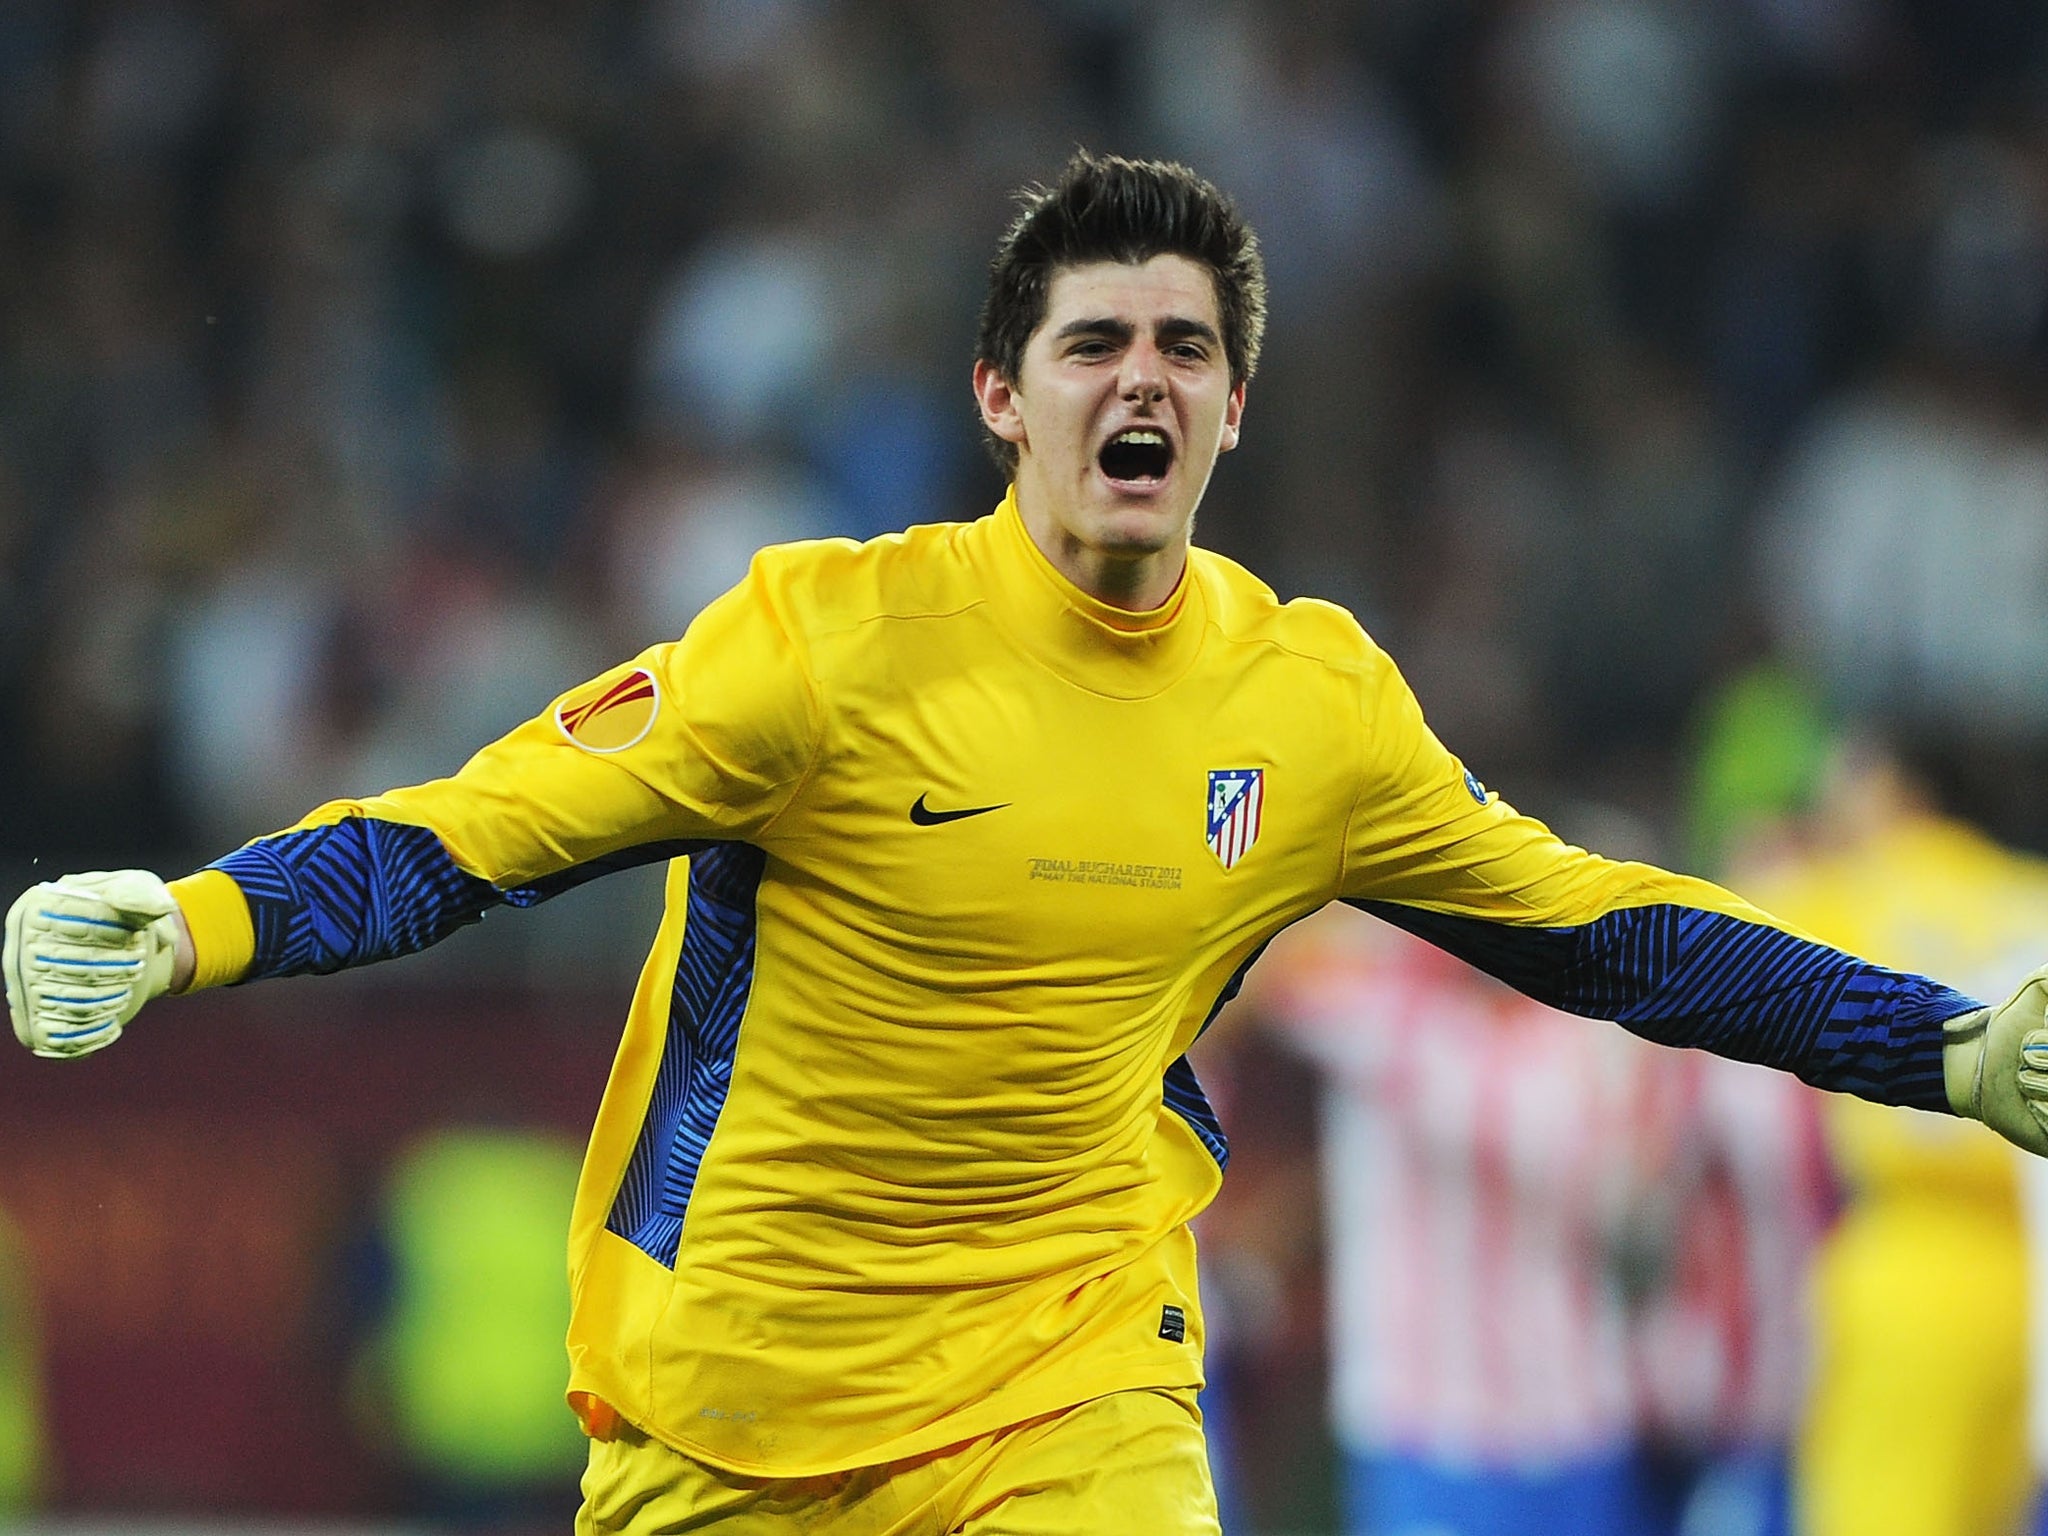 Thibault Courtois is currently on his third consecutive season on-loan at Atletico Madrid